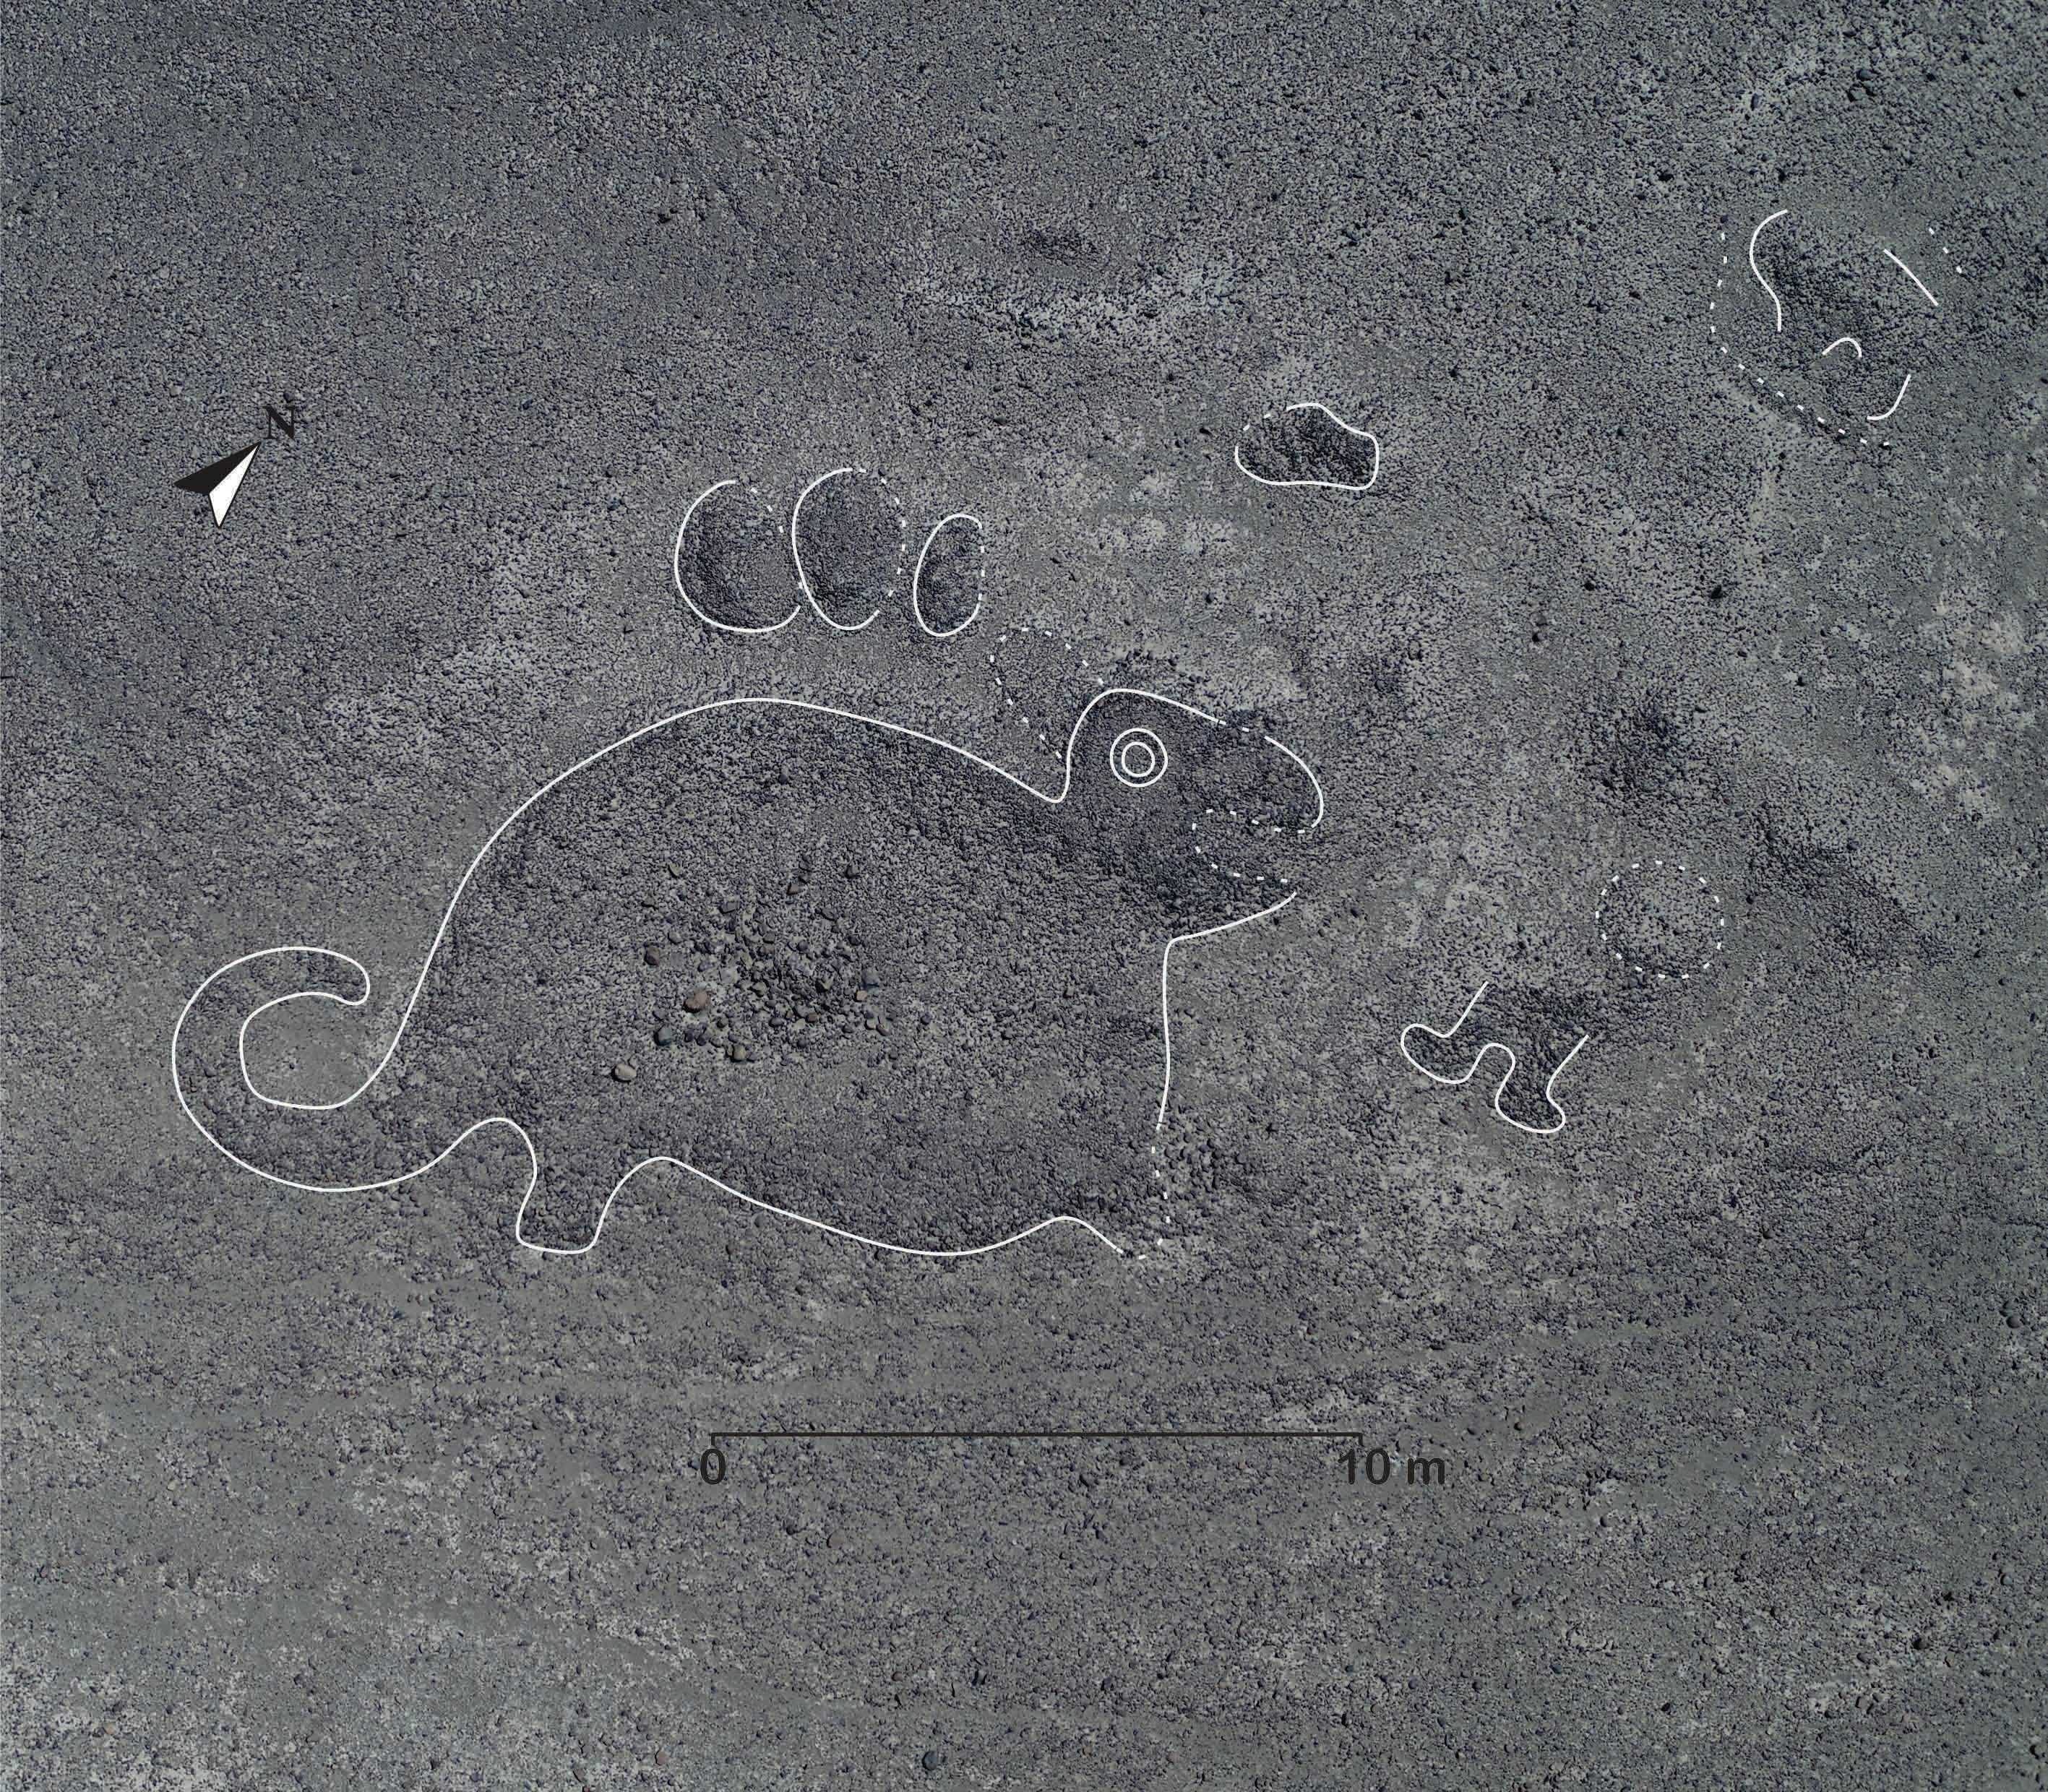 Rat and human figures found in Nazca desert